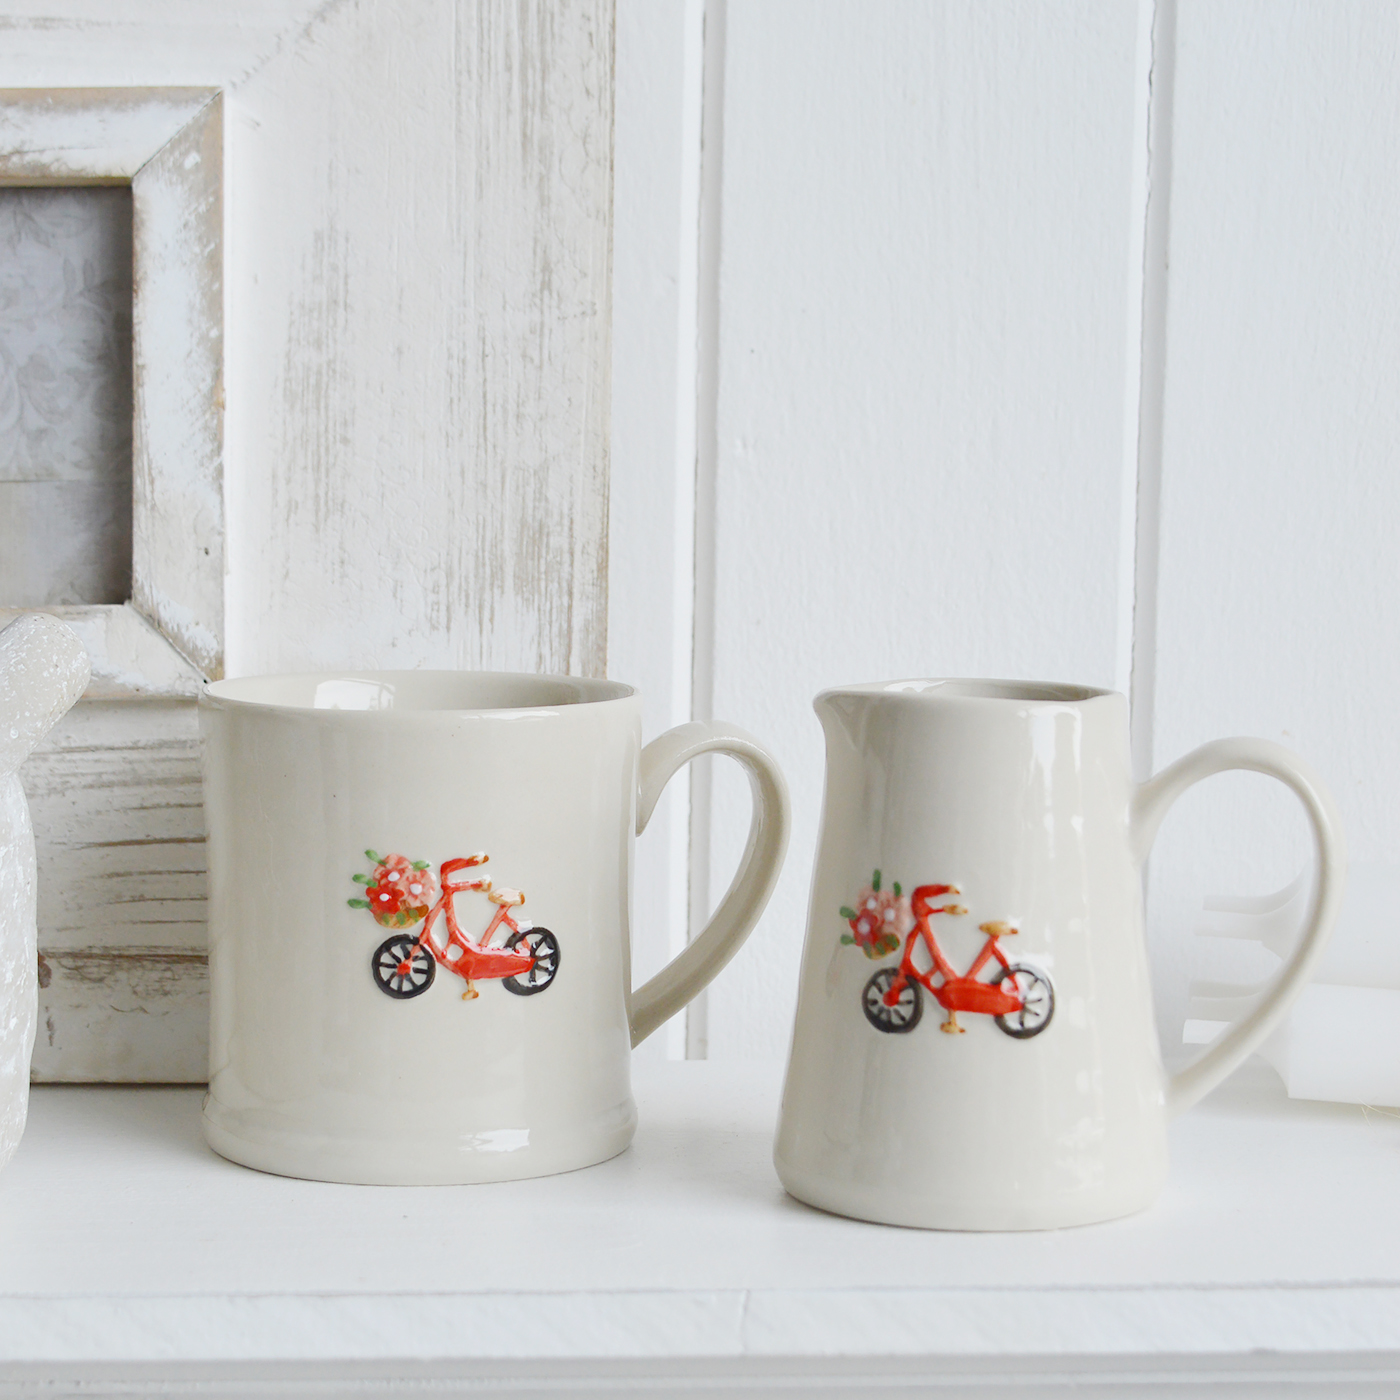 Bicycle Mini mug and milk jug  - Coastal furniture and New England home decor from The White Lighthouse coastal, New England and country furniture and home decor accessories UK